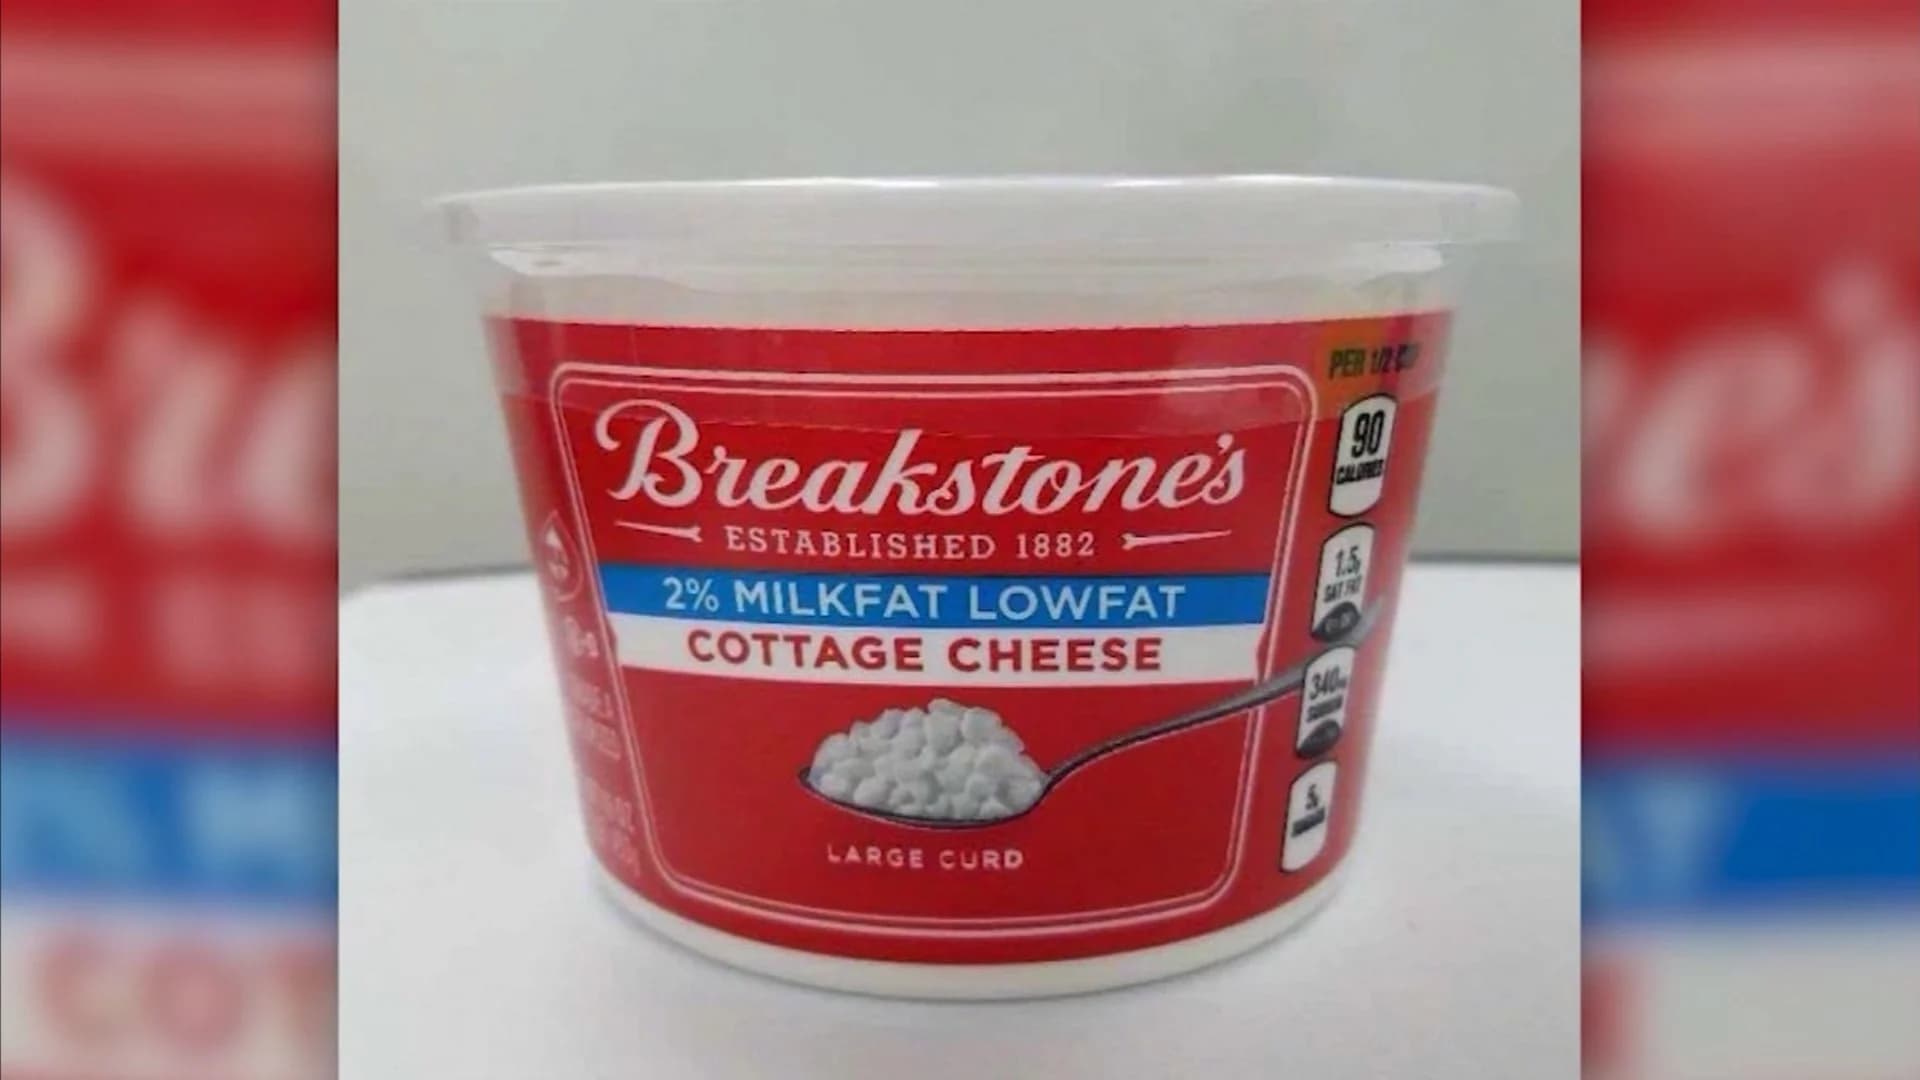 Company recalls thousands of cottage cheese cases over potential metal presence